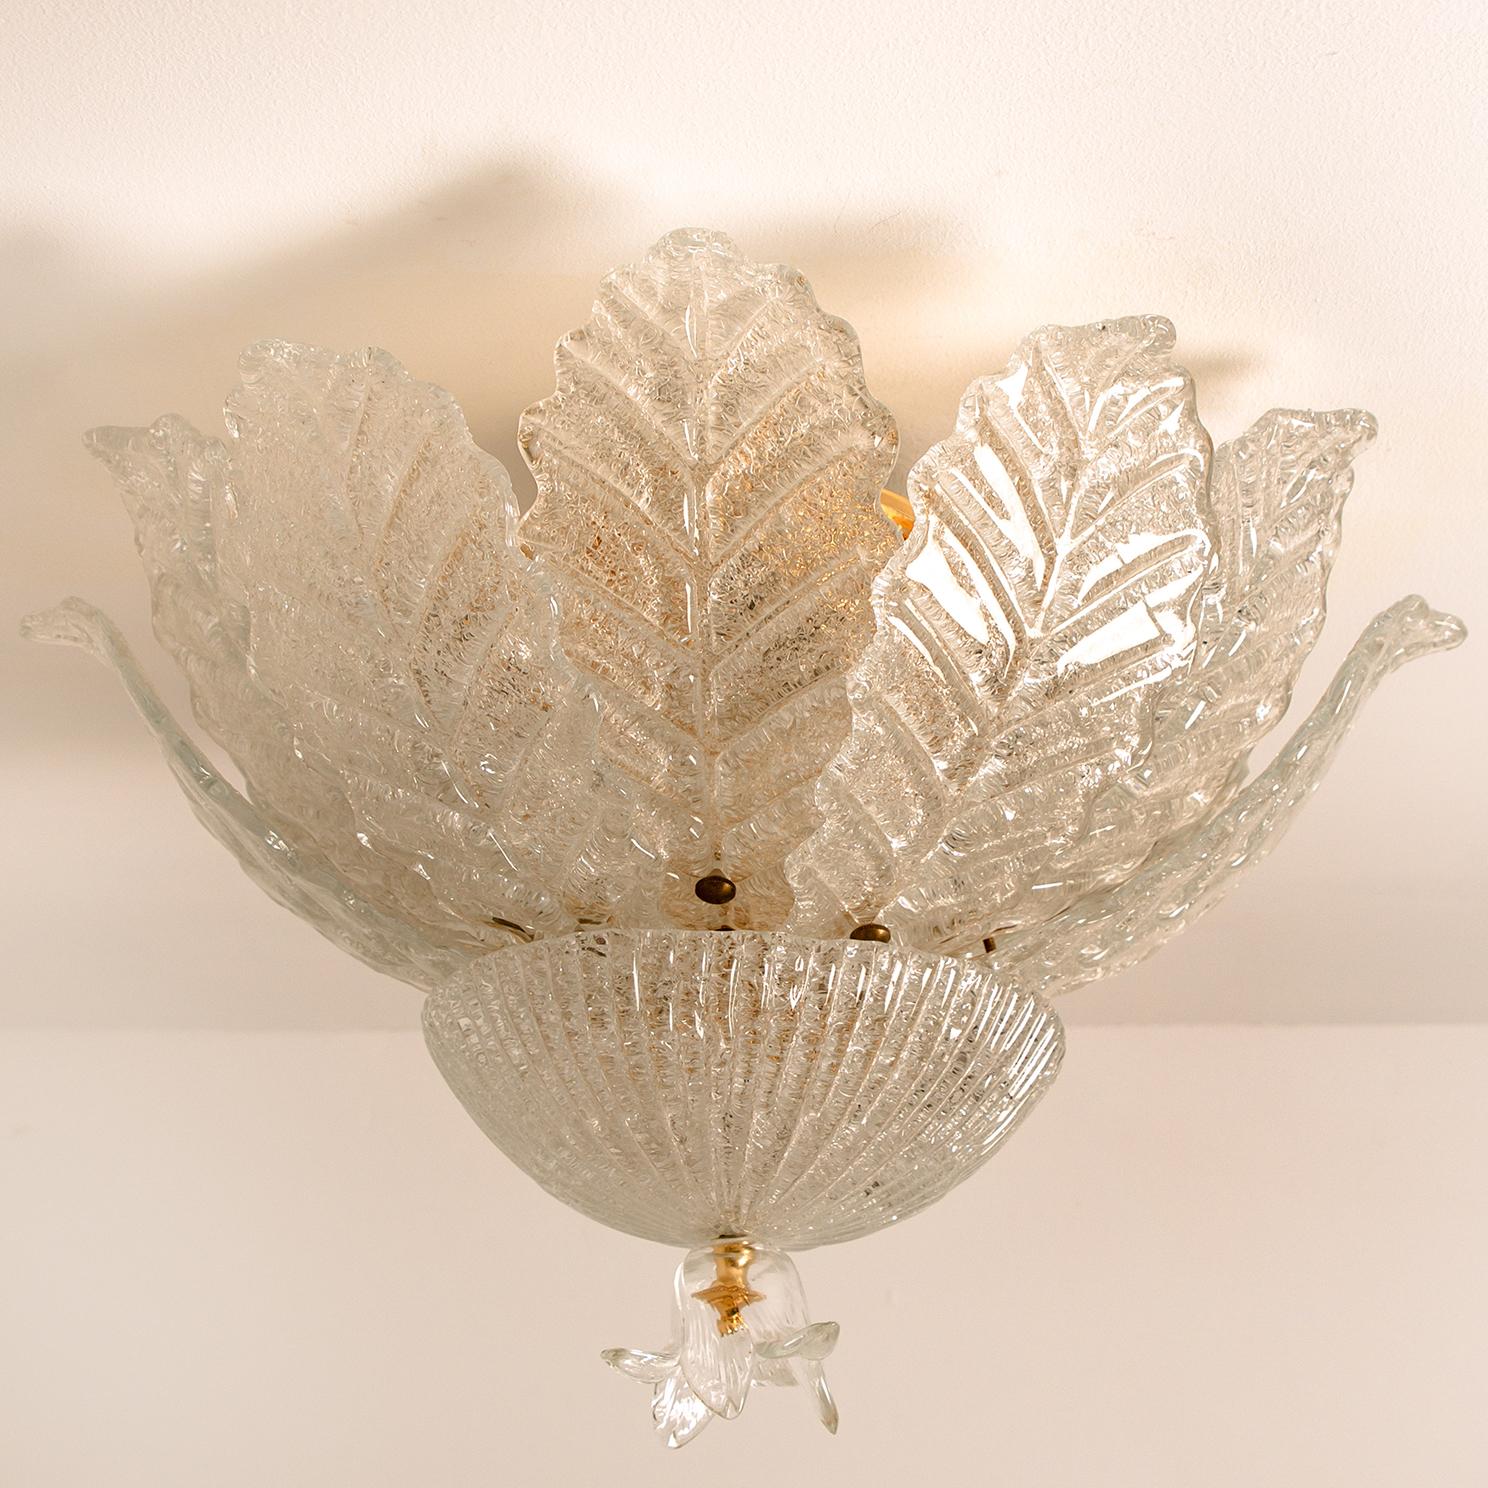 An elegant hand blown Murano glass flush mount of Barovier & Toso. The light fixture consists 12 blown Murano glass leaves. Mounted on an brass frame. The leaves refract light beautifully. The flush mount fills the room with a soft, warm and